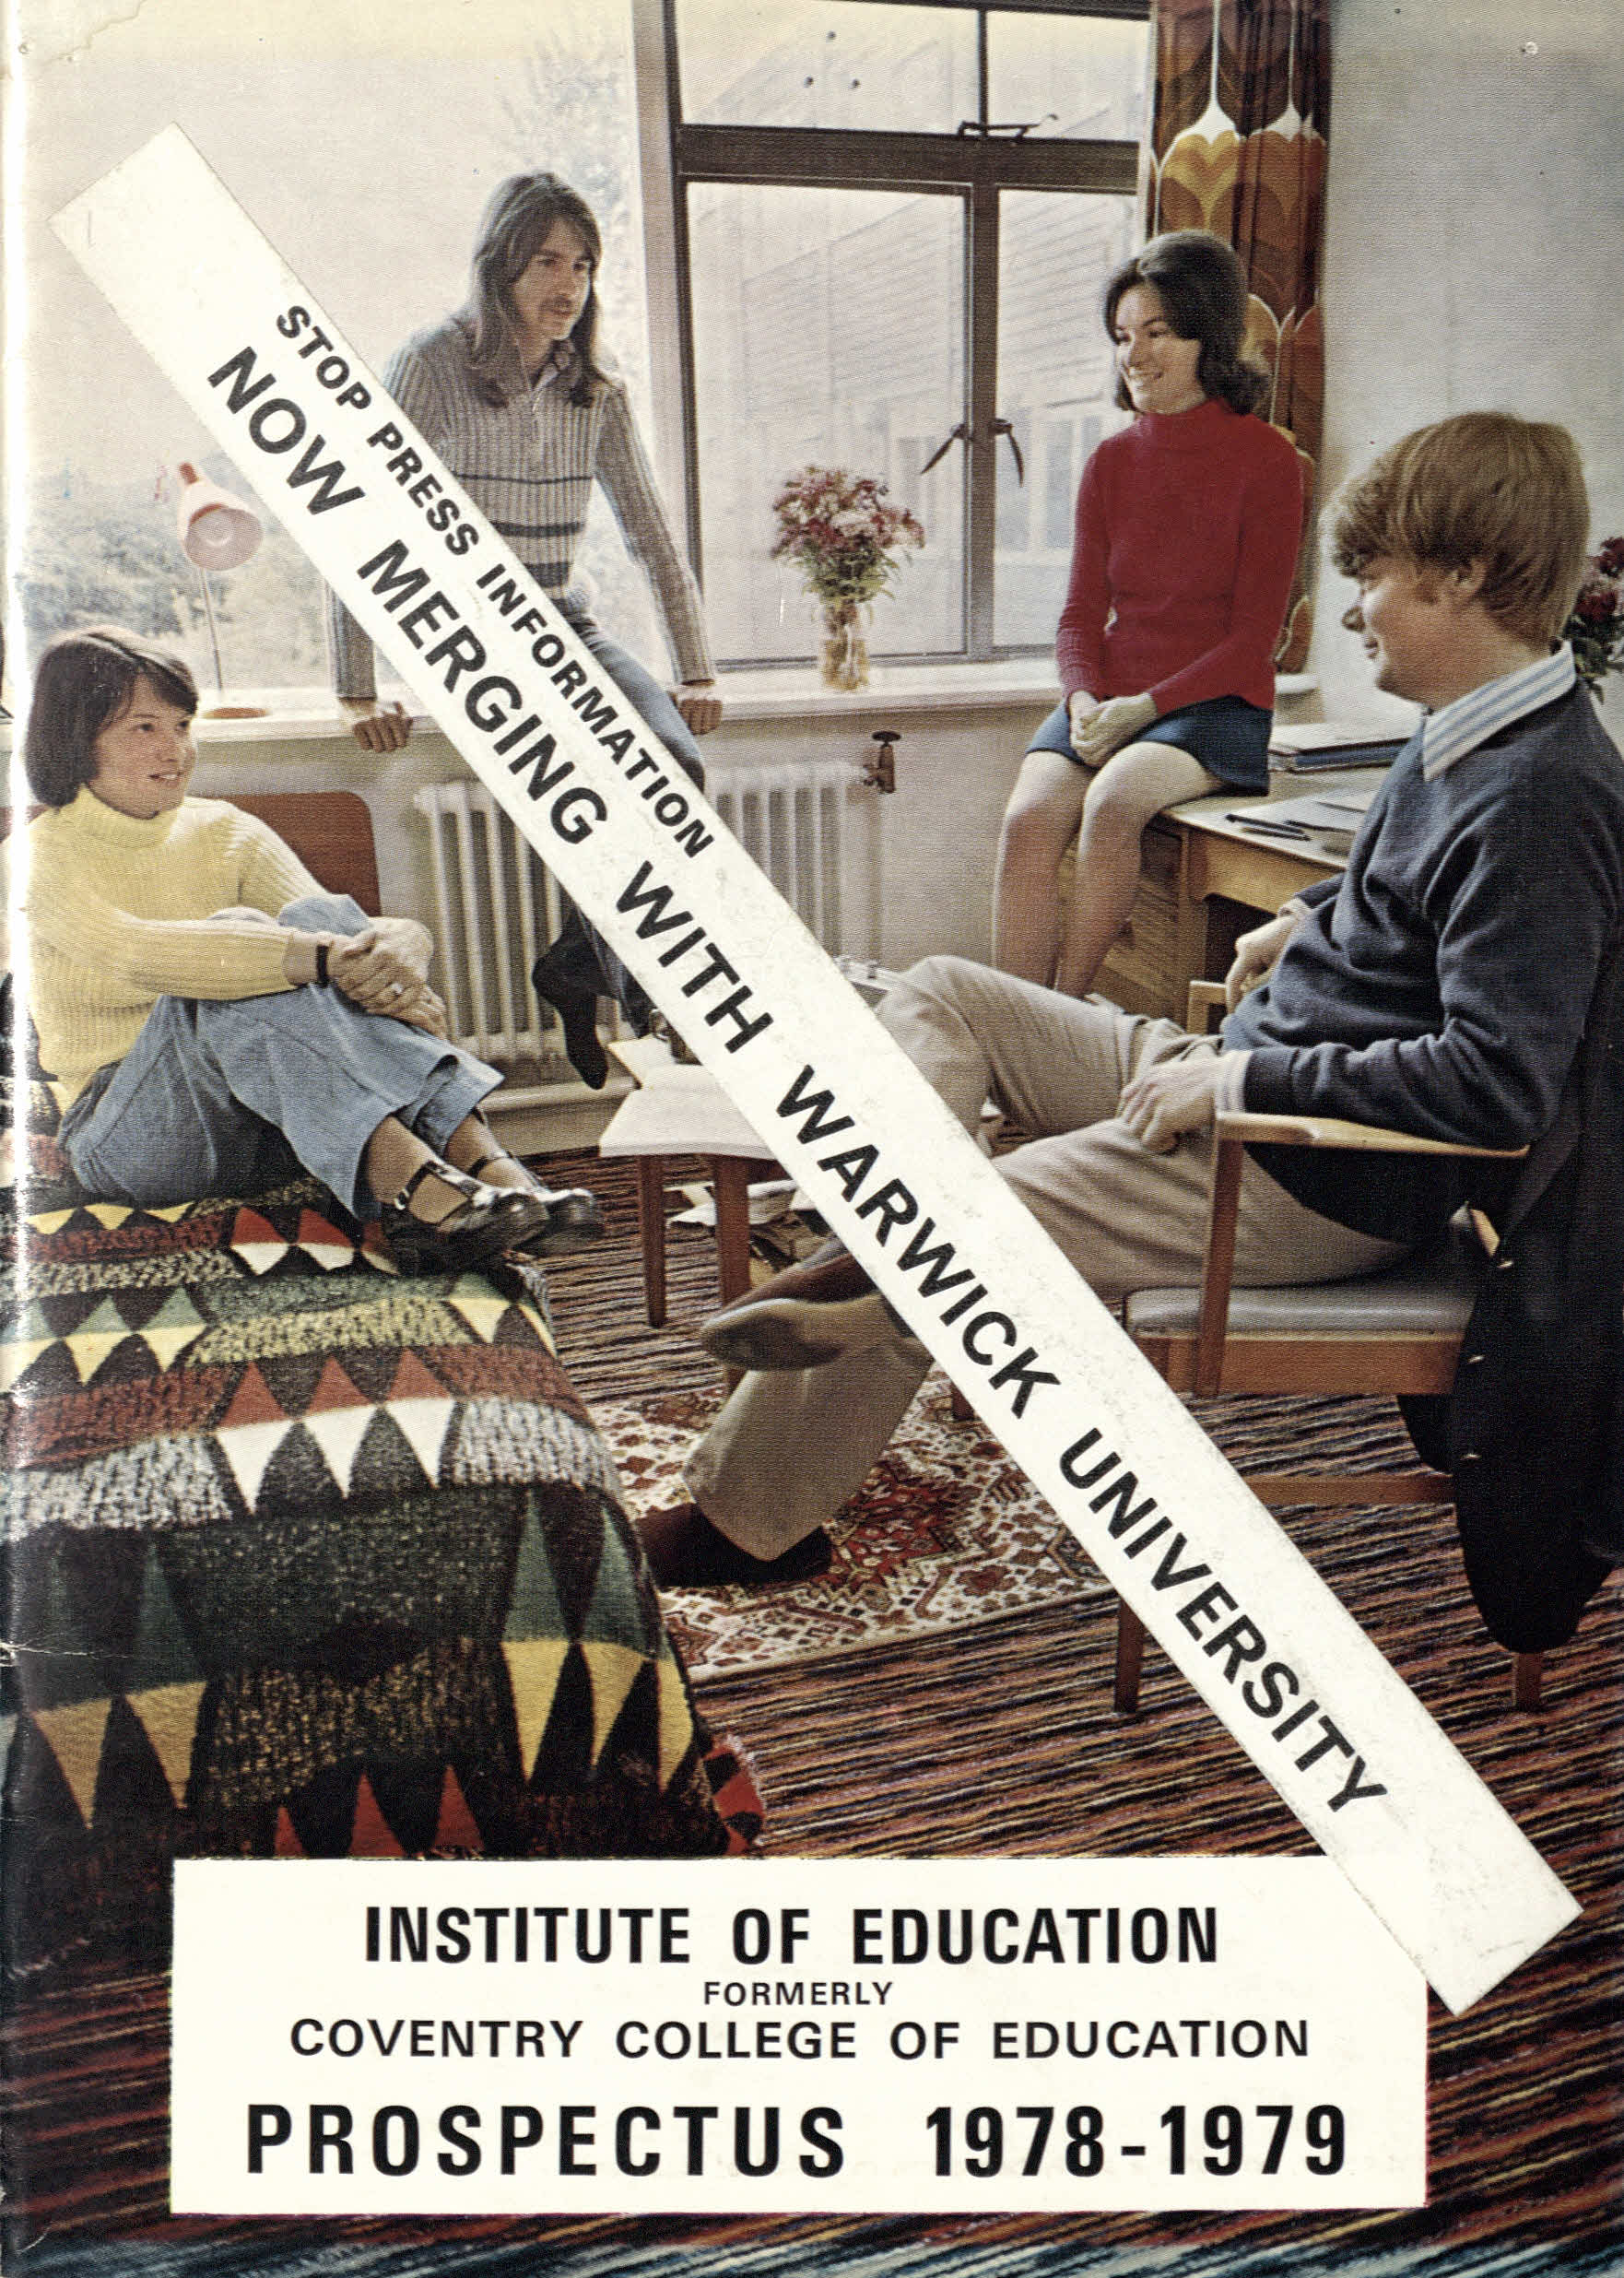 coventry_college_of_education_porspectus_1978-1979_001_2.jpg